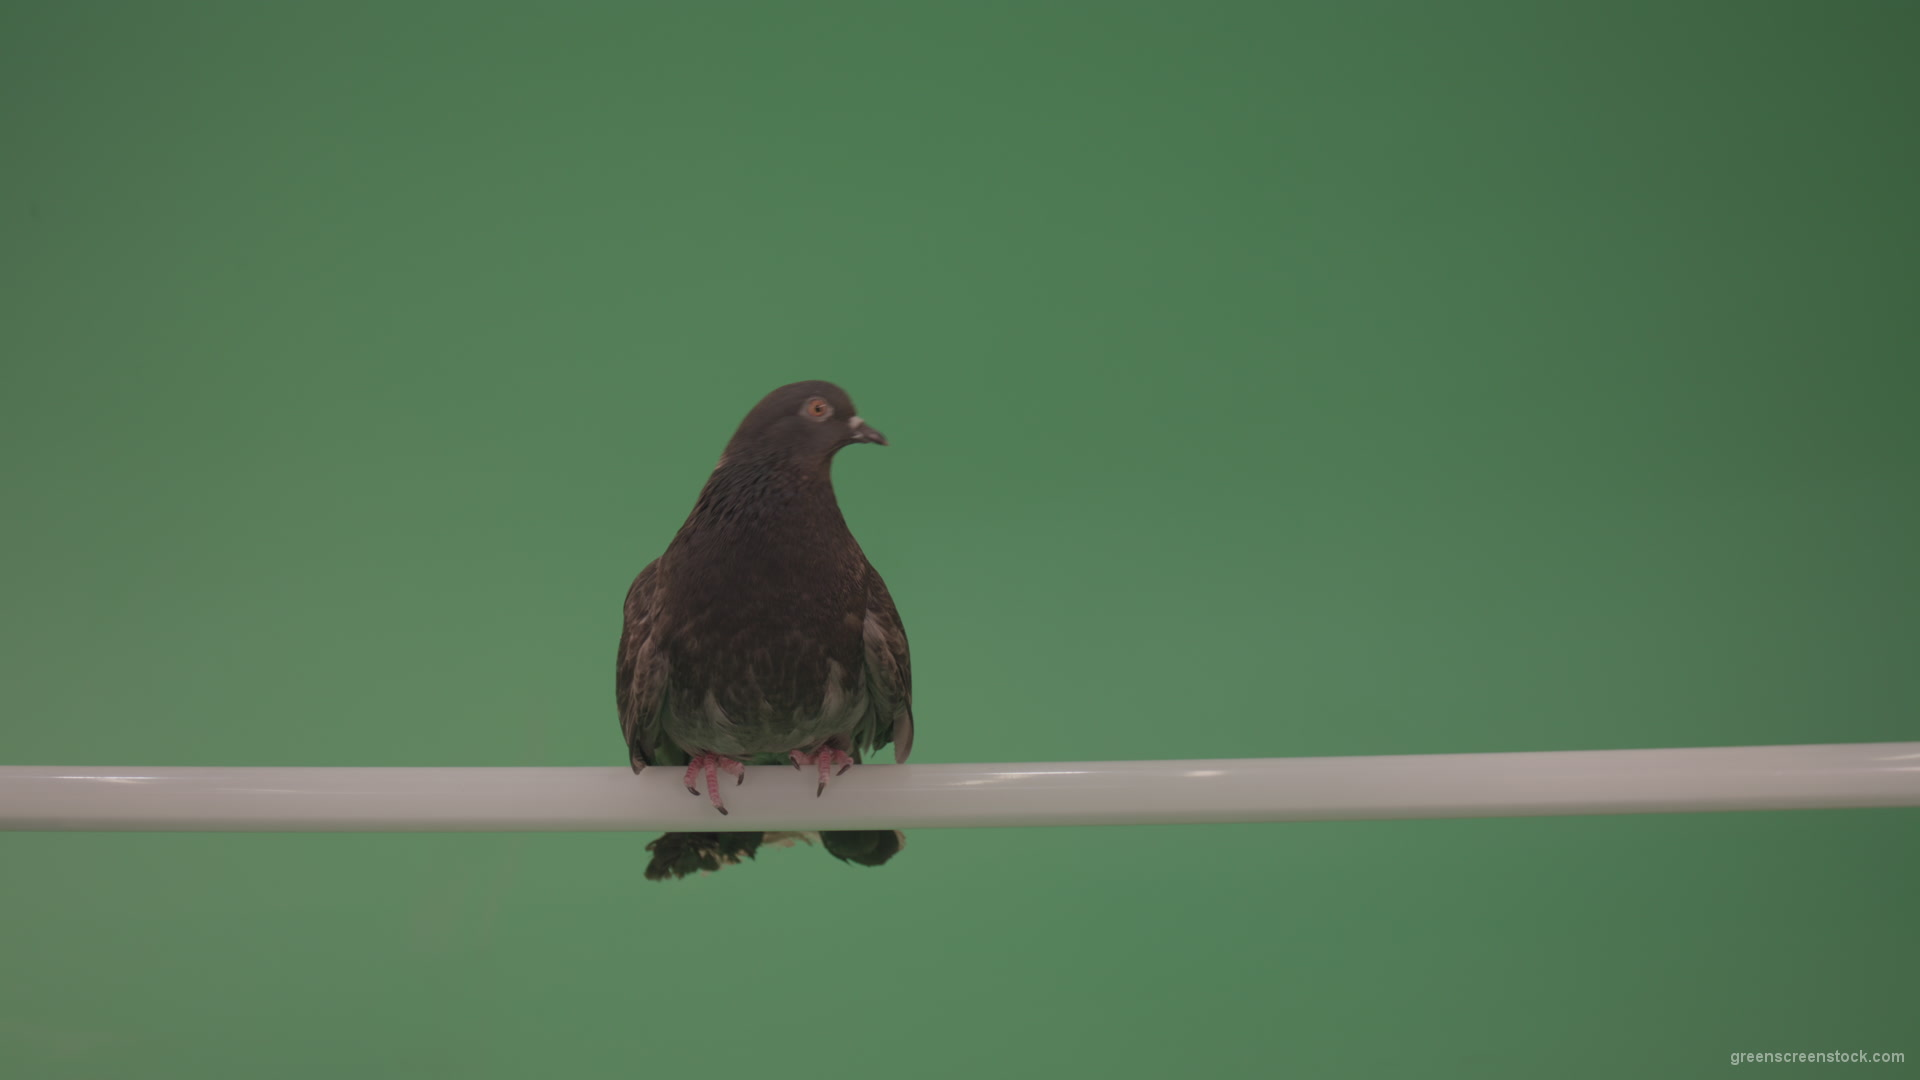 Dove-sitting-on-a-branch-in-the-city-isolated-in-green-screen-studio_004 Green Screen Stock